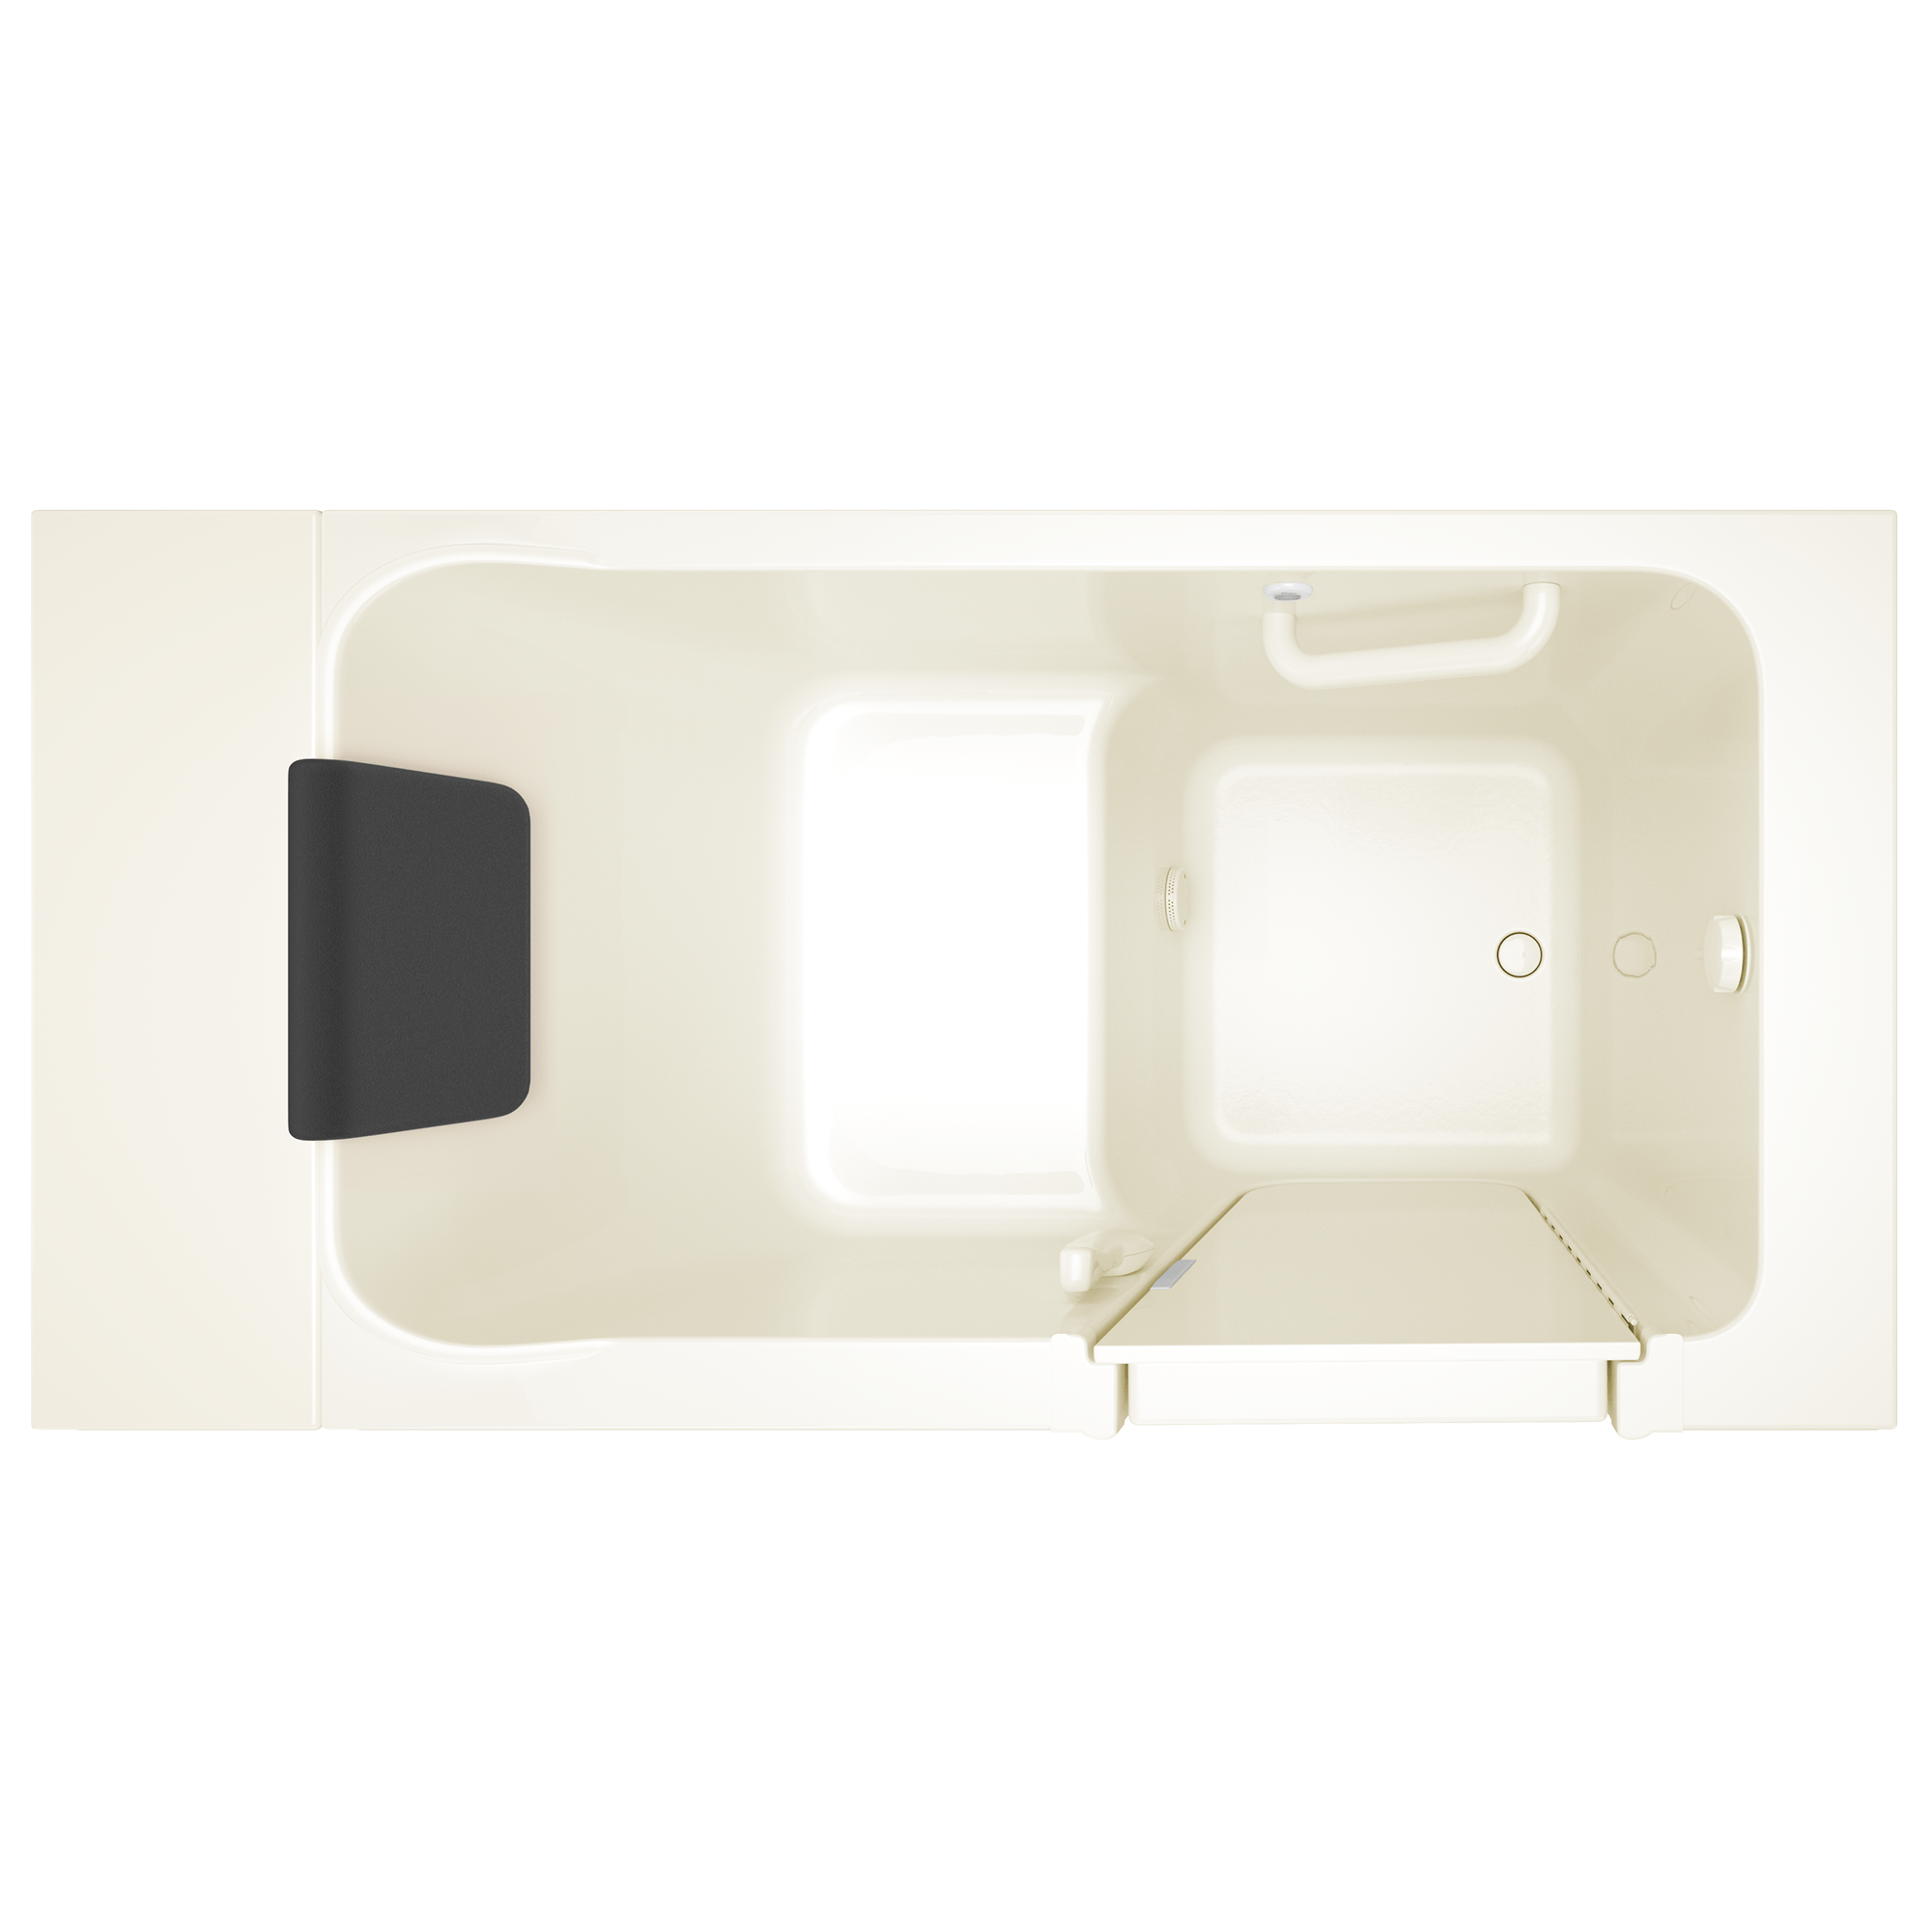 Acrylic Luxury Series 30 x 51 -Inch Walk-in Tub With Soaker System - Right-Hand Drain